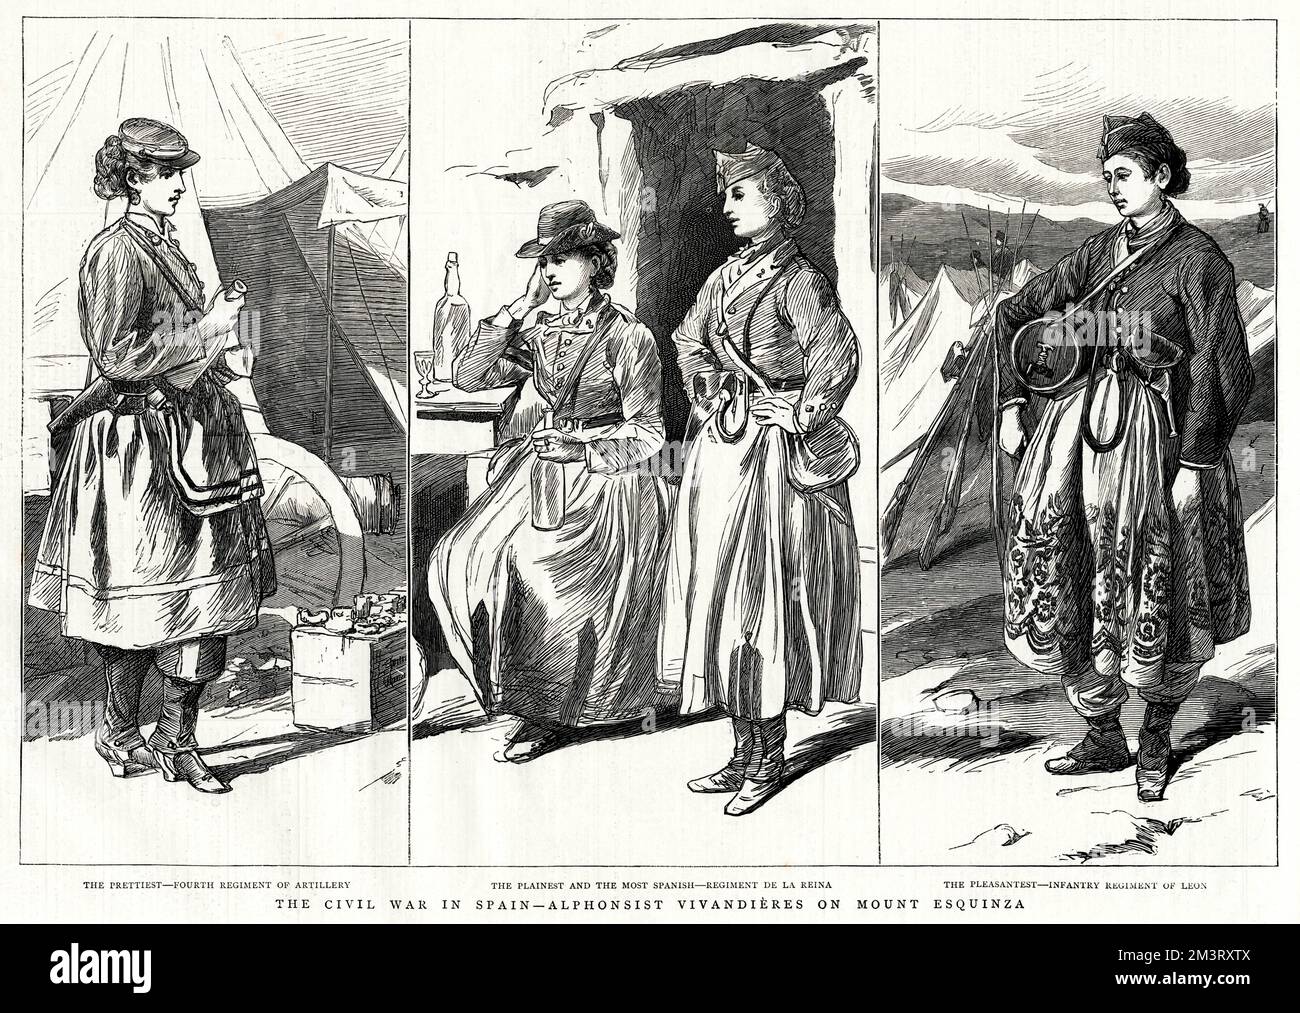 Three sketches of female Alphonsist vivandieres from different regiments, shortly after the restoration of the Bourbon monarchy under Alphonso XII in Spain, December 1874.      Date: 1875 Stock Photo